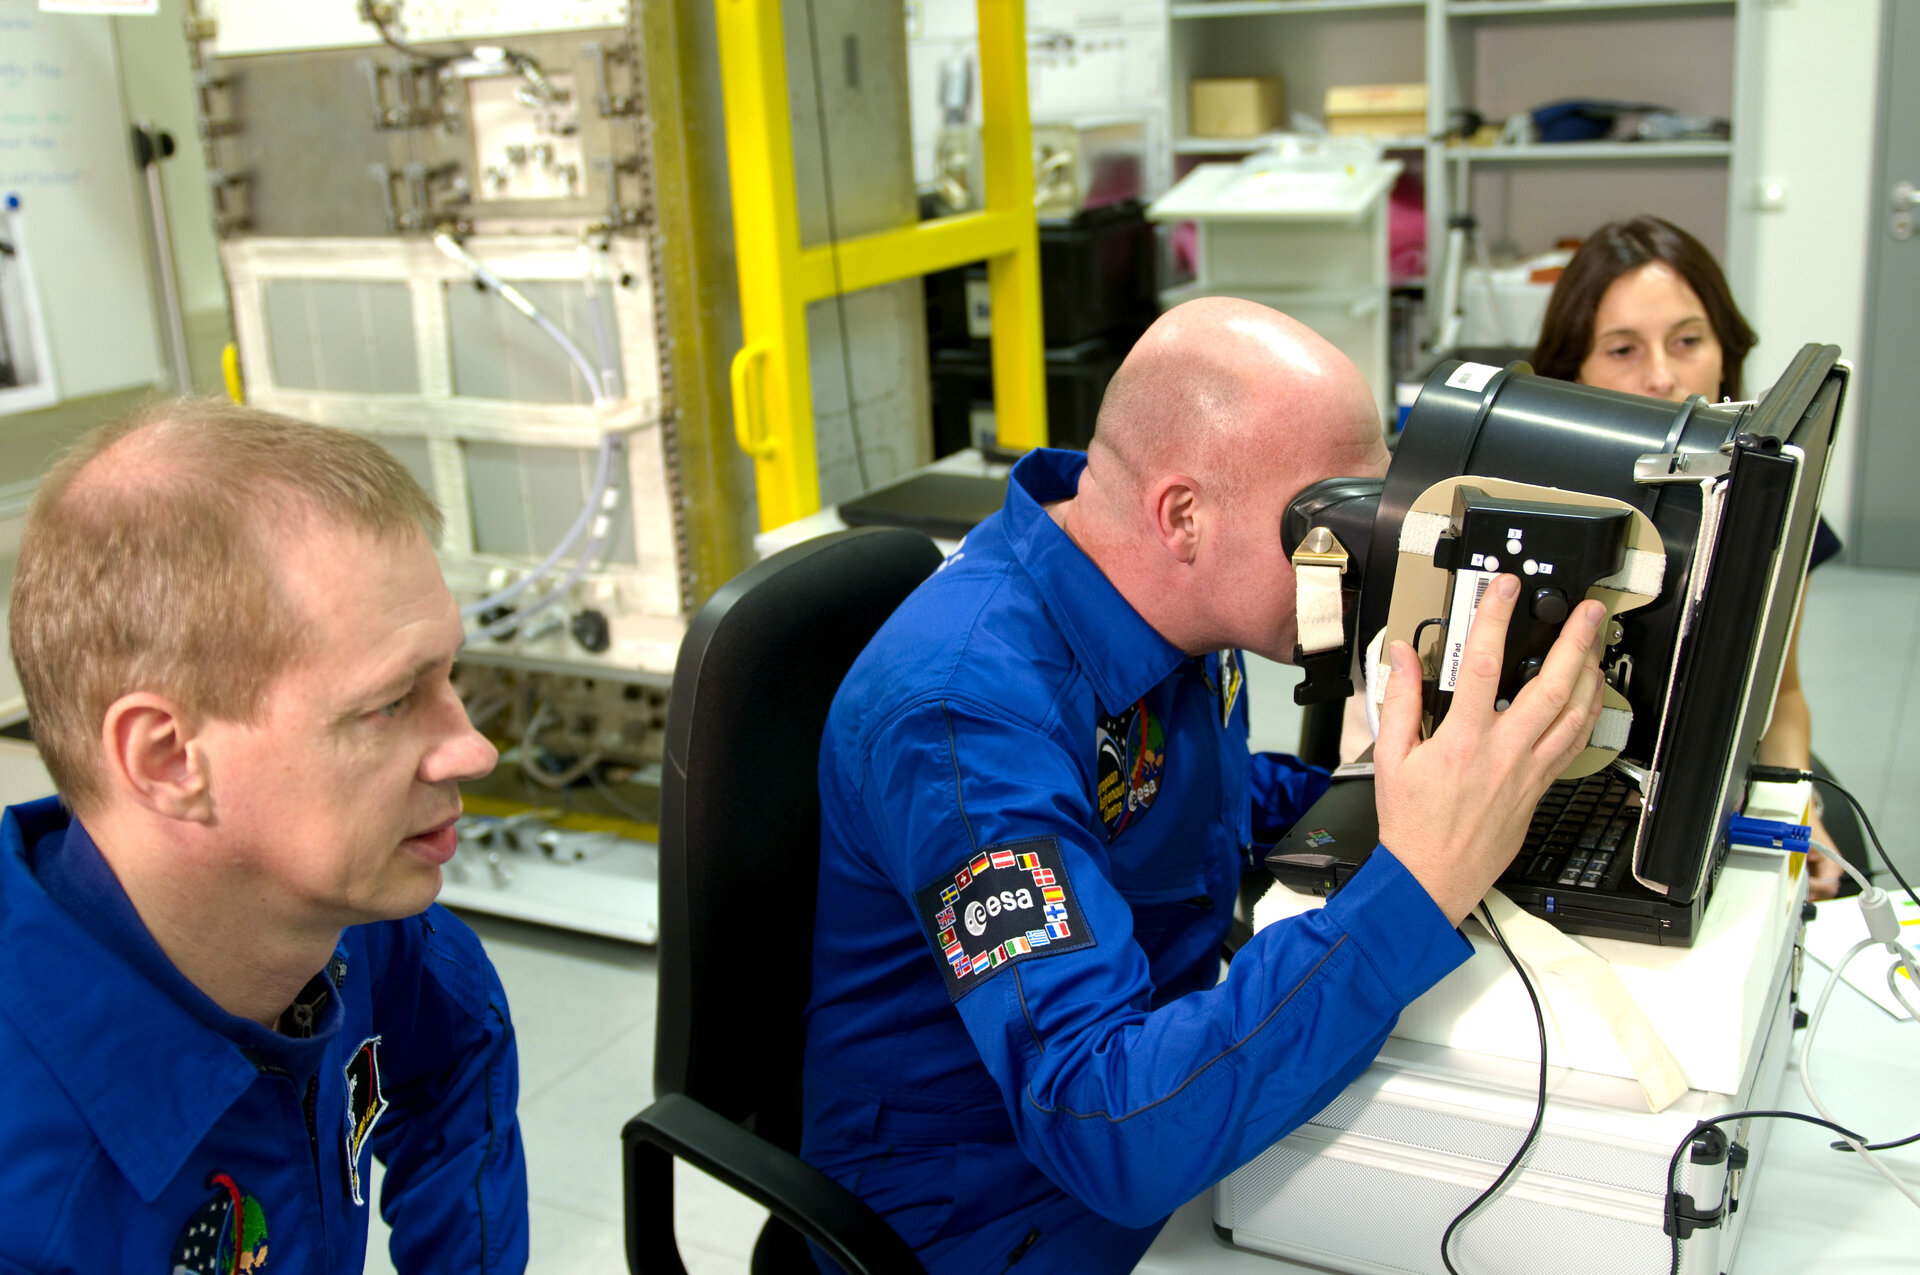 ESA astronauts Frank De Winne and Andre Kuipers during Neurospat training at EAC